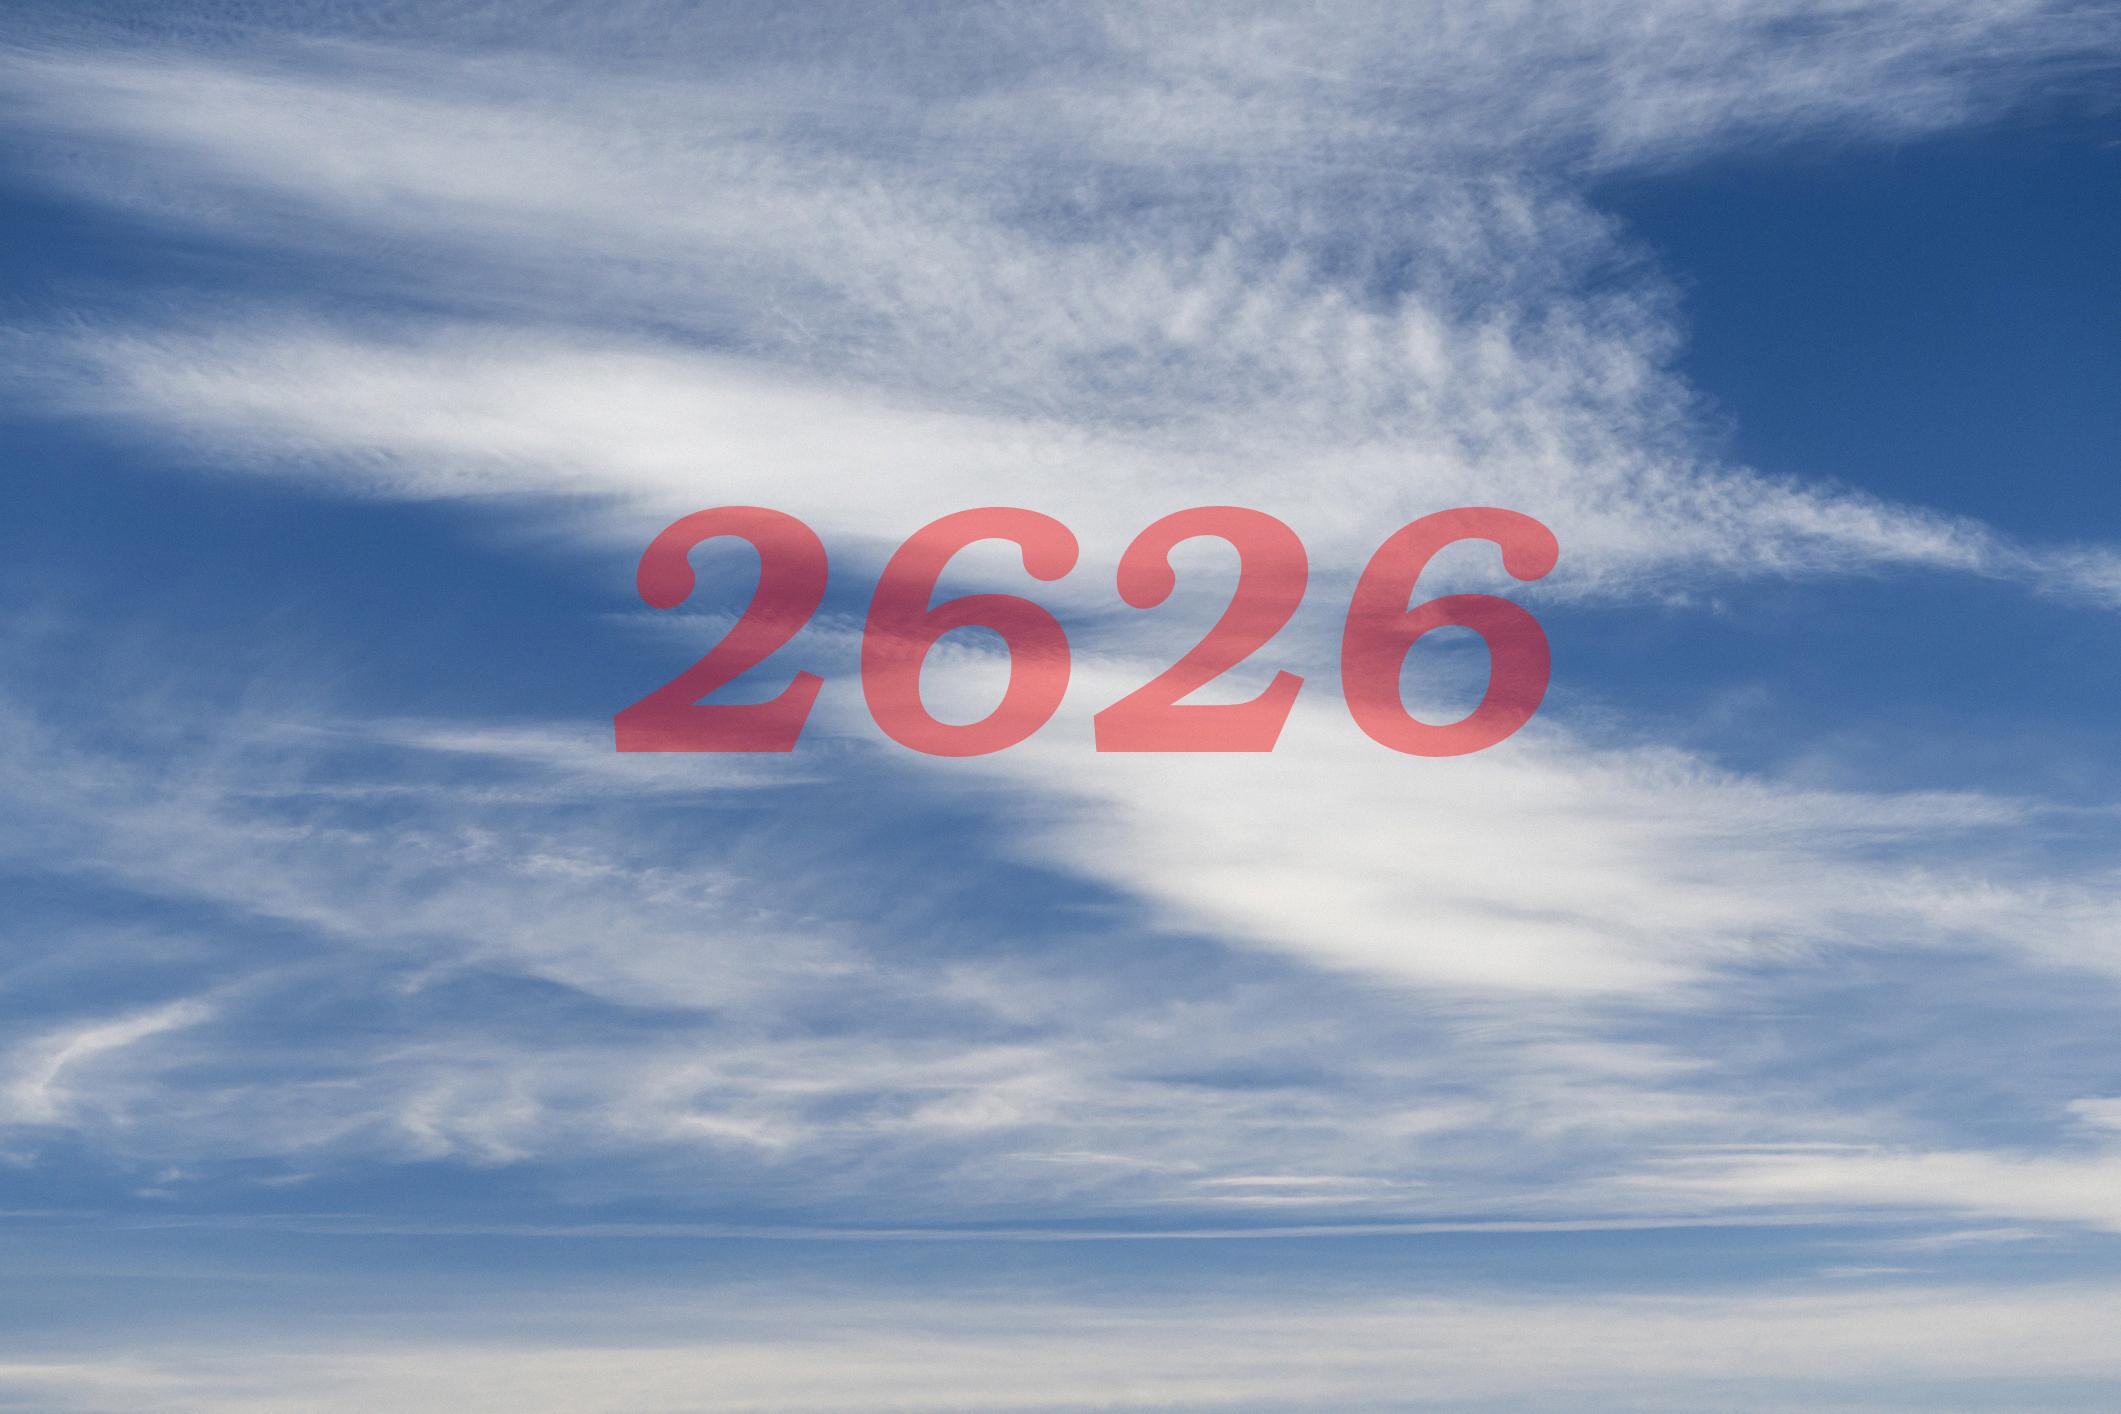 2626 angel number meaning